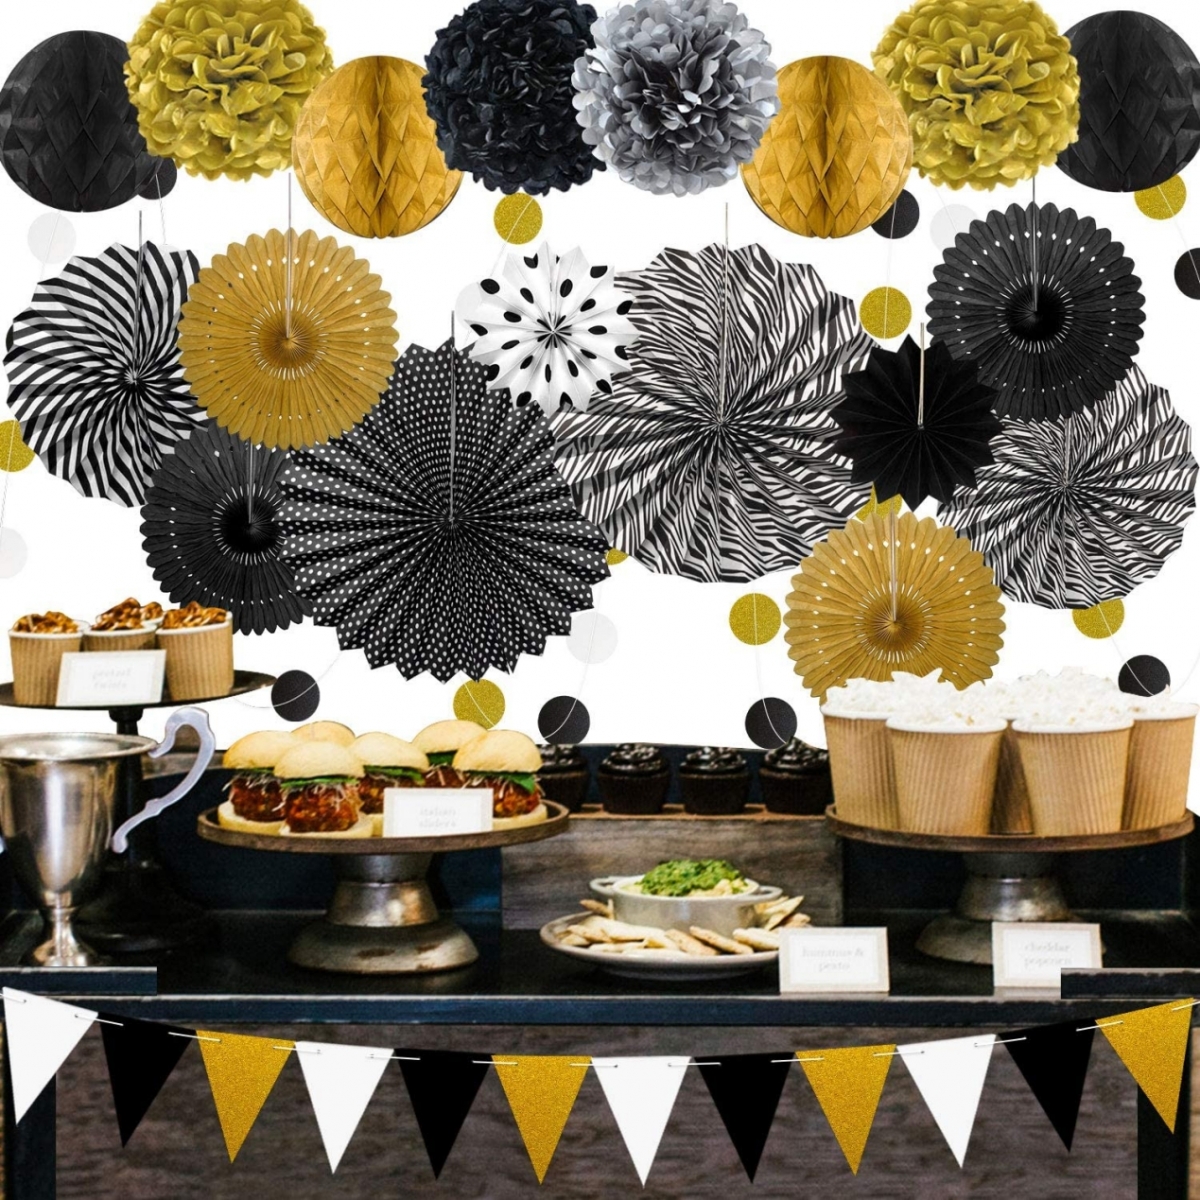 23PCS Black and Golden theme Hanging Paper Fans, Pom Poms Flowers, Garlands String Polka Dot and Bunting Flags-GOON- Christmas Decoration, Halloween Decor, Harvest Decor, Easter Decor, Thanksgiving Day Decor, Party Decor